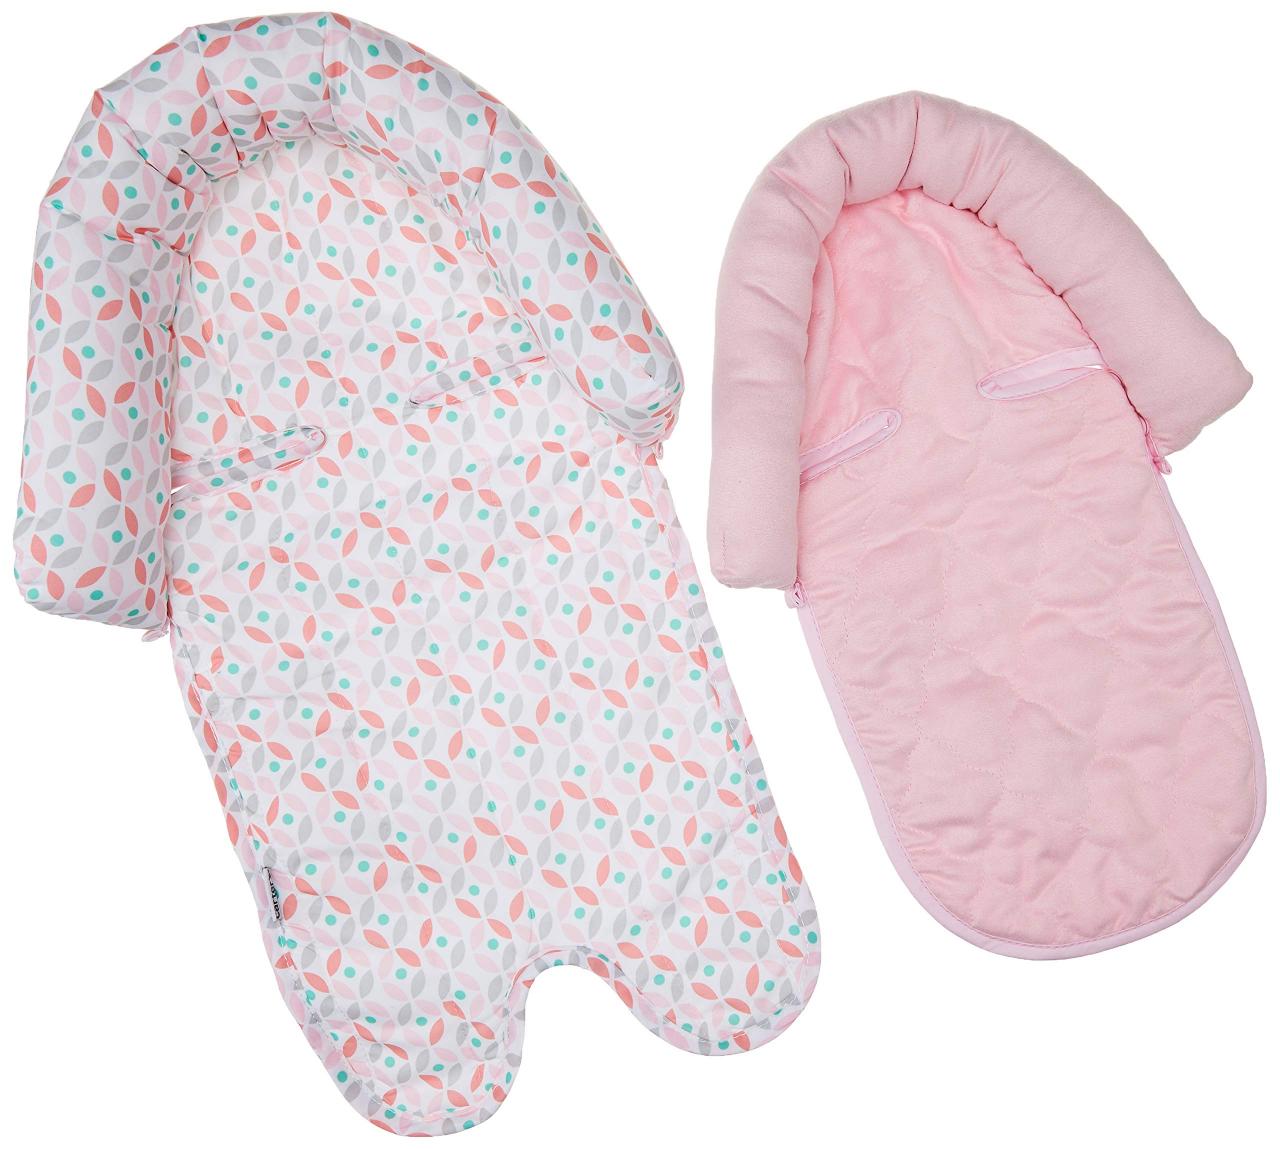 Carter's Infant 2-in-1 Head Support for Carseats and Strollers Flower/Pink-  Buy Online in Andorra at andorra.desertcart.com. ProductId : 47774198.